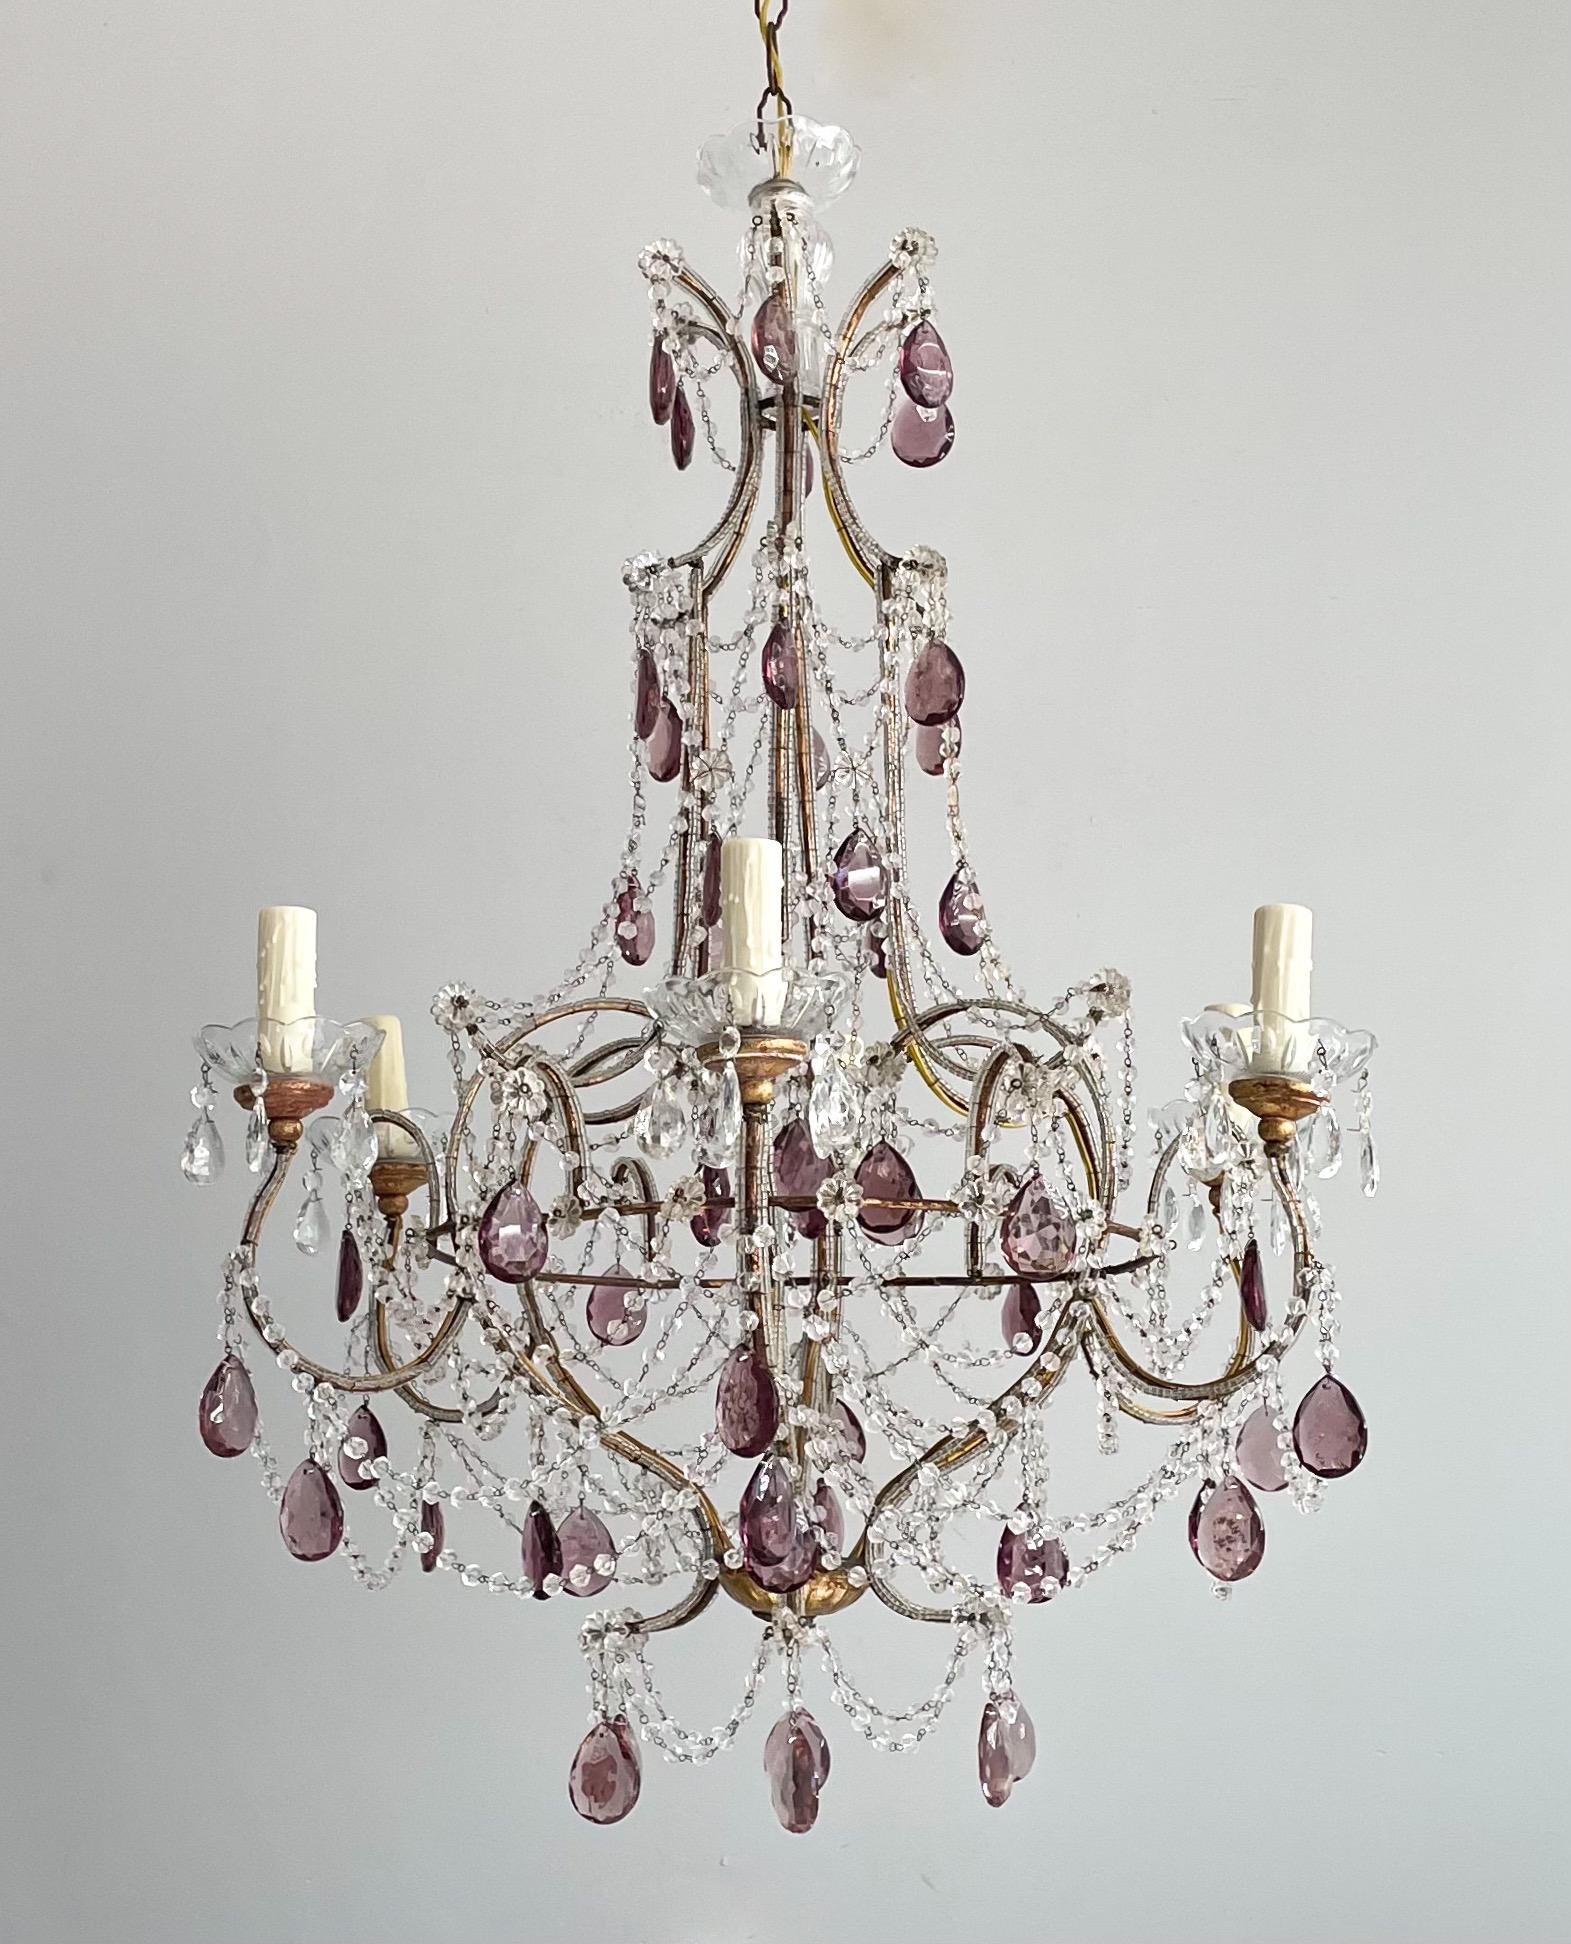 Outstanding, 1940s Italian gilt-iron and crystal beaded chandelier. 

The chandelier consists of a shapely gilded iron frame with glass beading. Beautiful faceted glass prisms in shades amethyst and garlands of “English cut” beads complete the